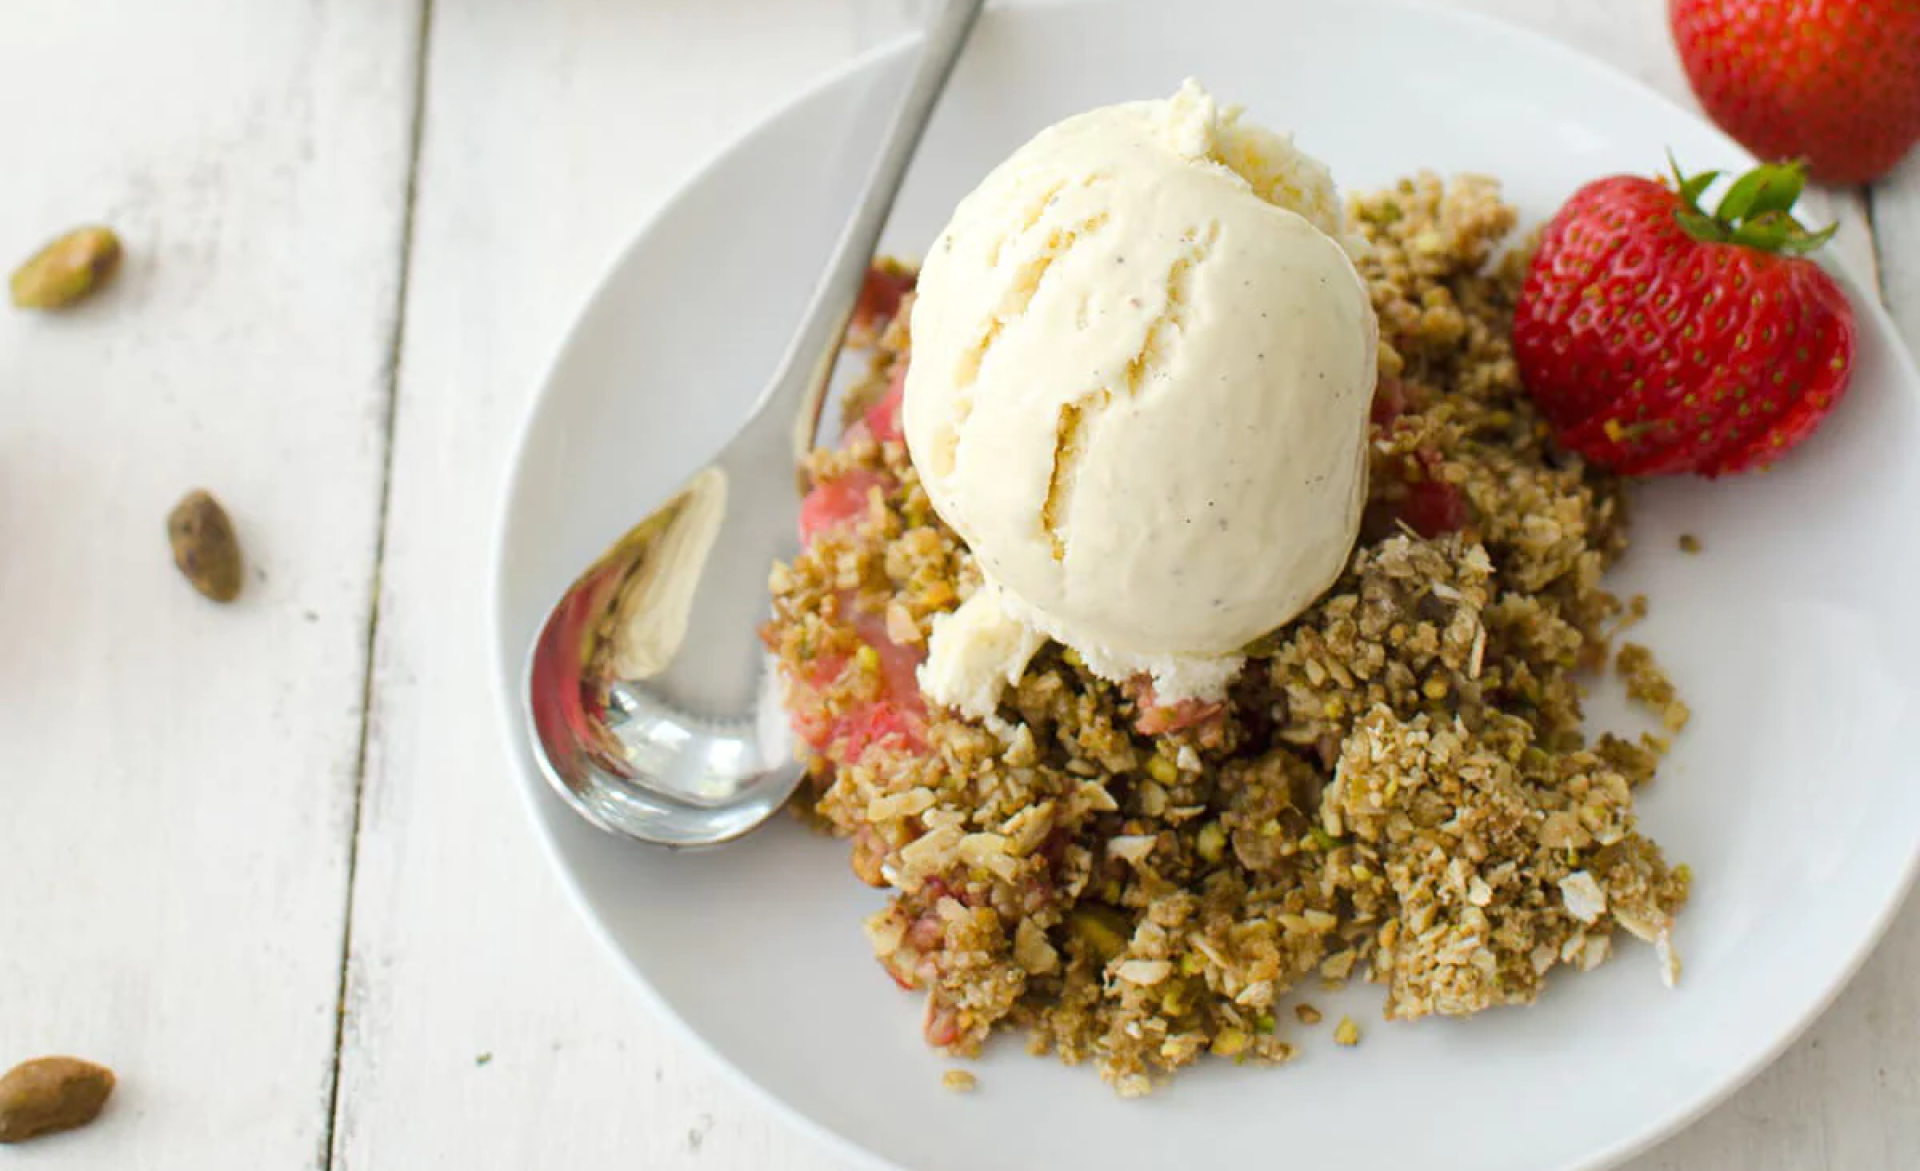 Summer Strawberry Crumble